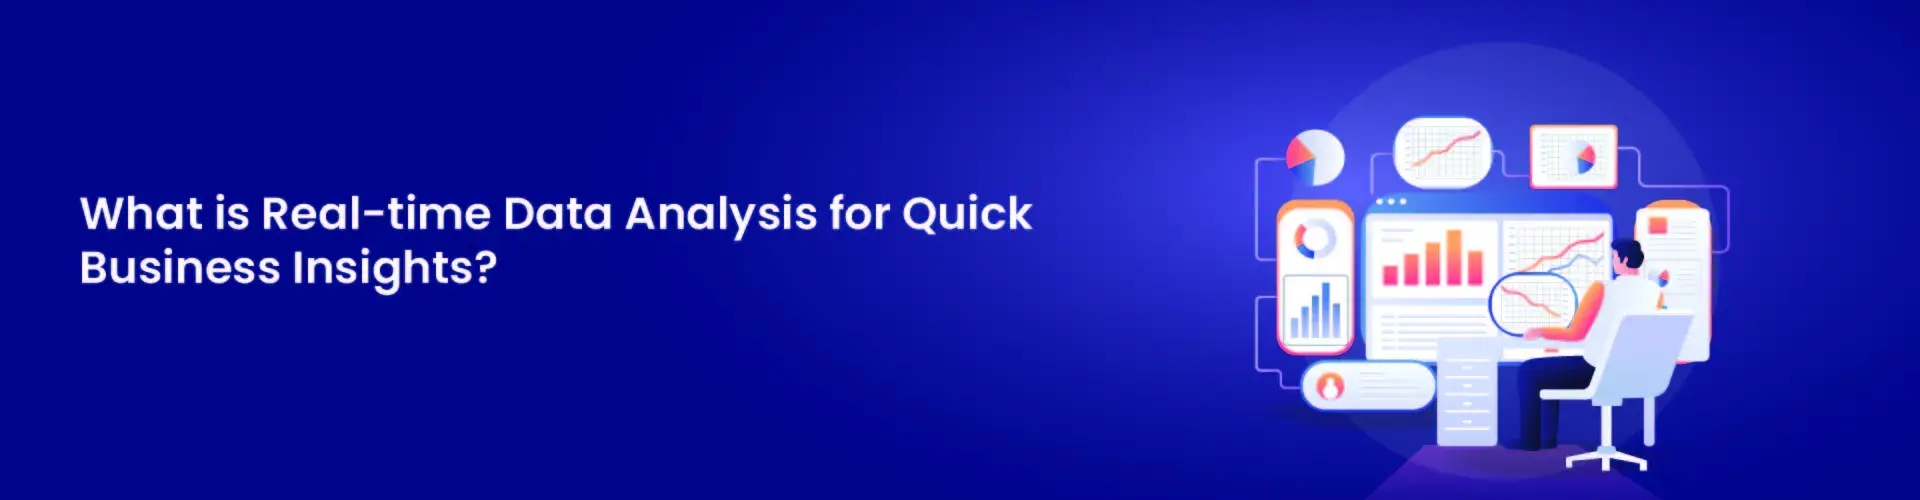 1712298010What is Real-time Data Analysis for Quick Business Insights.webp